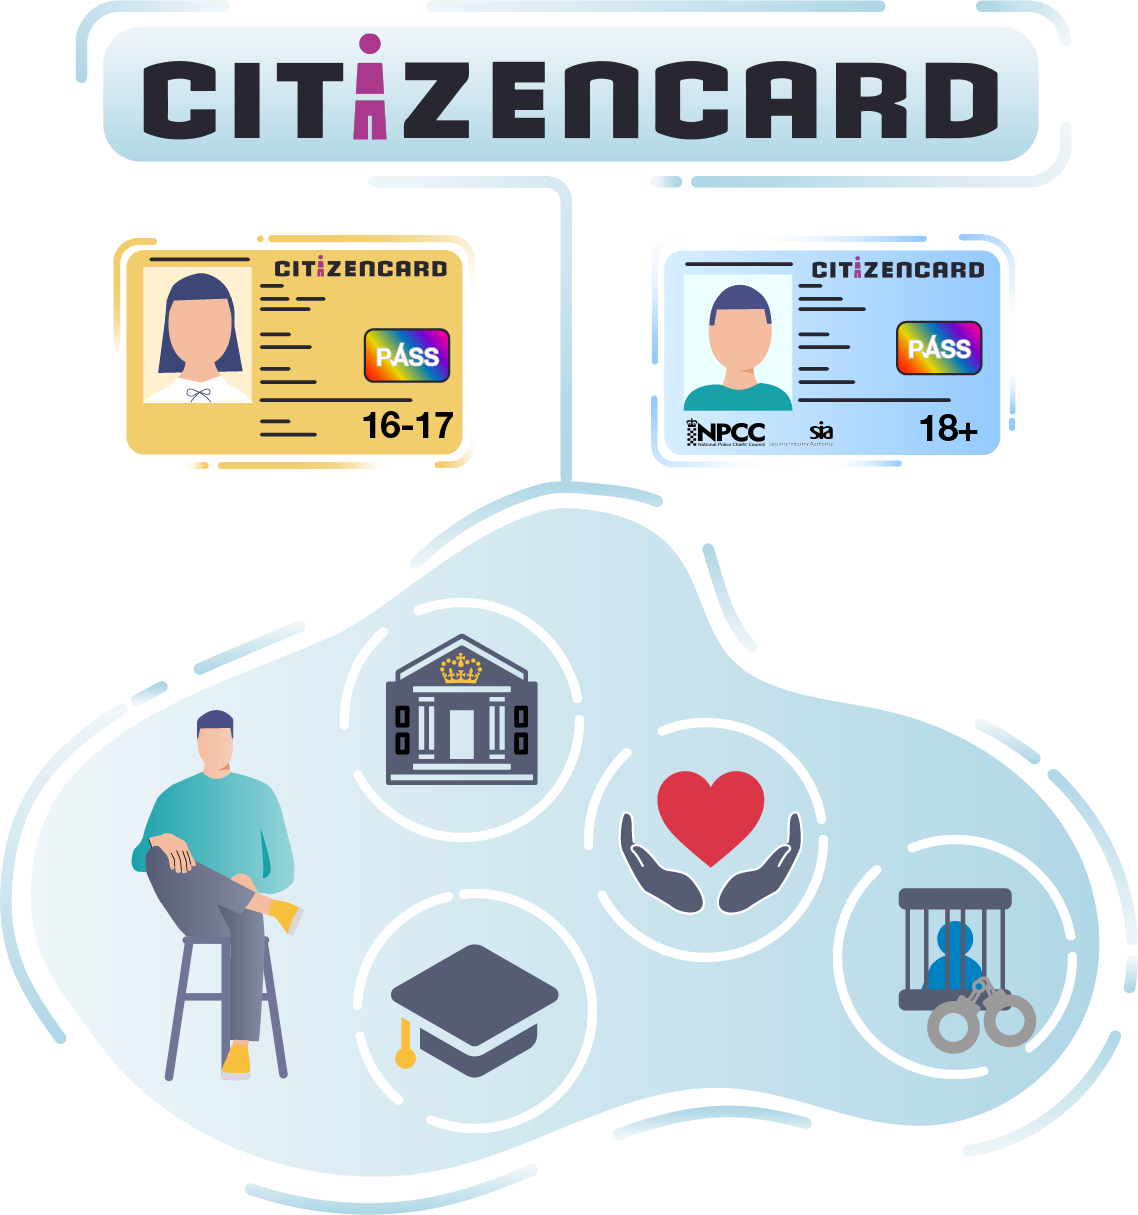 CitizenCard Bulk Application Scheme - we work with schools, universities, councils, prisons and charities